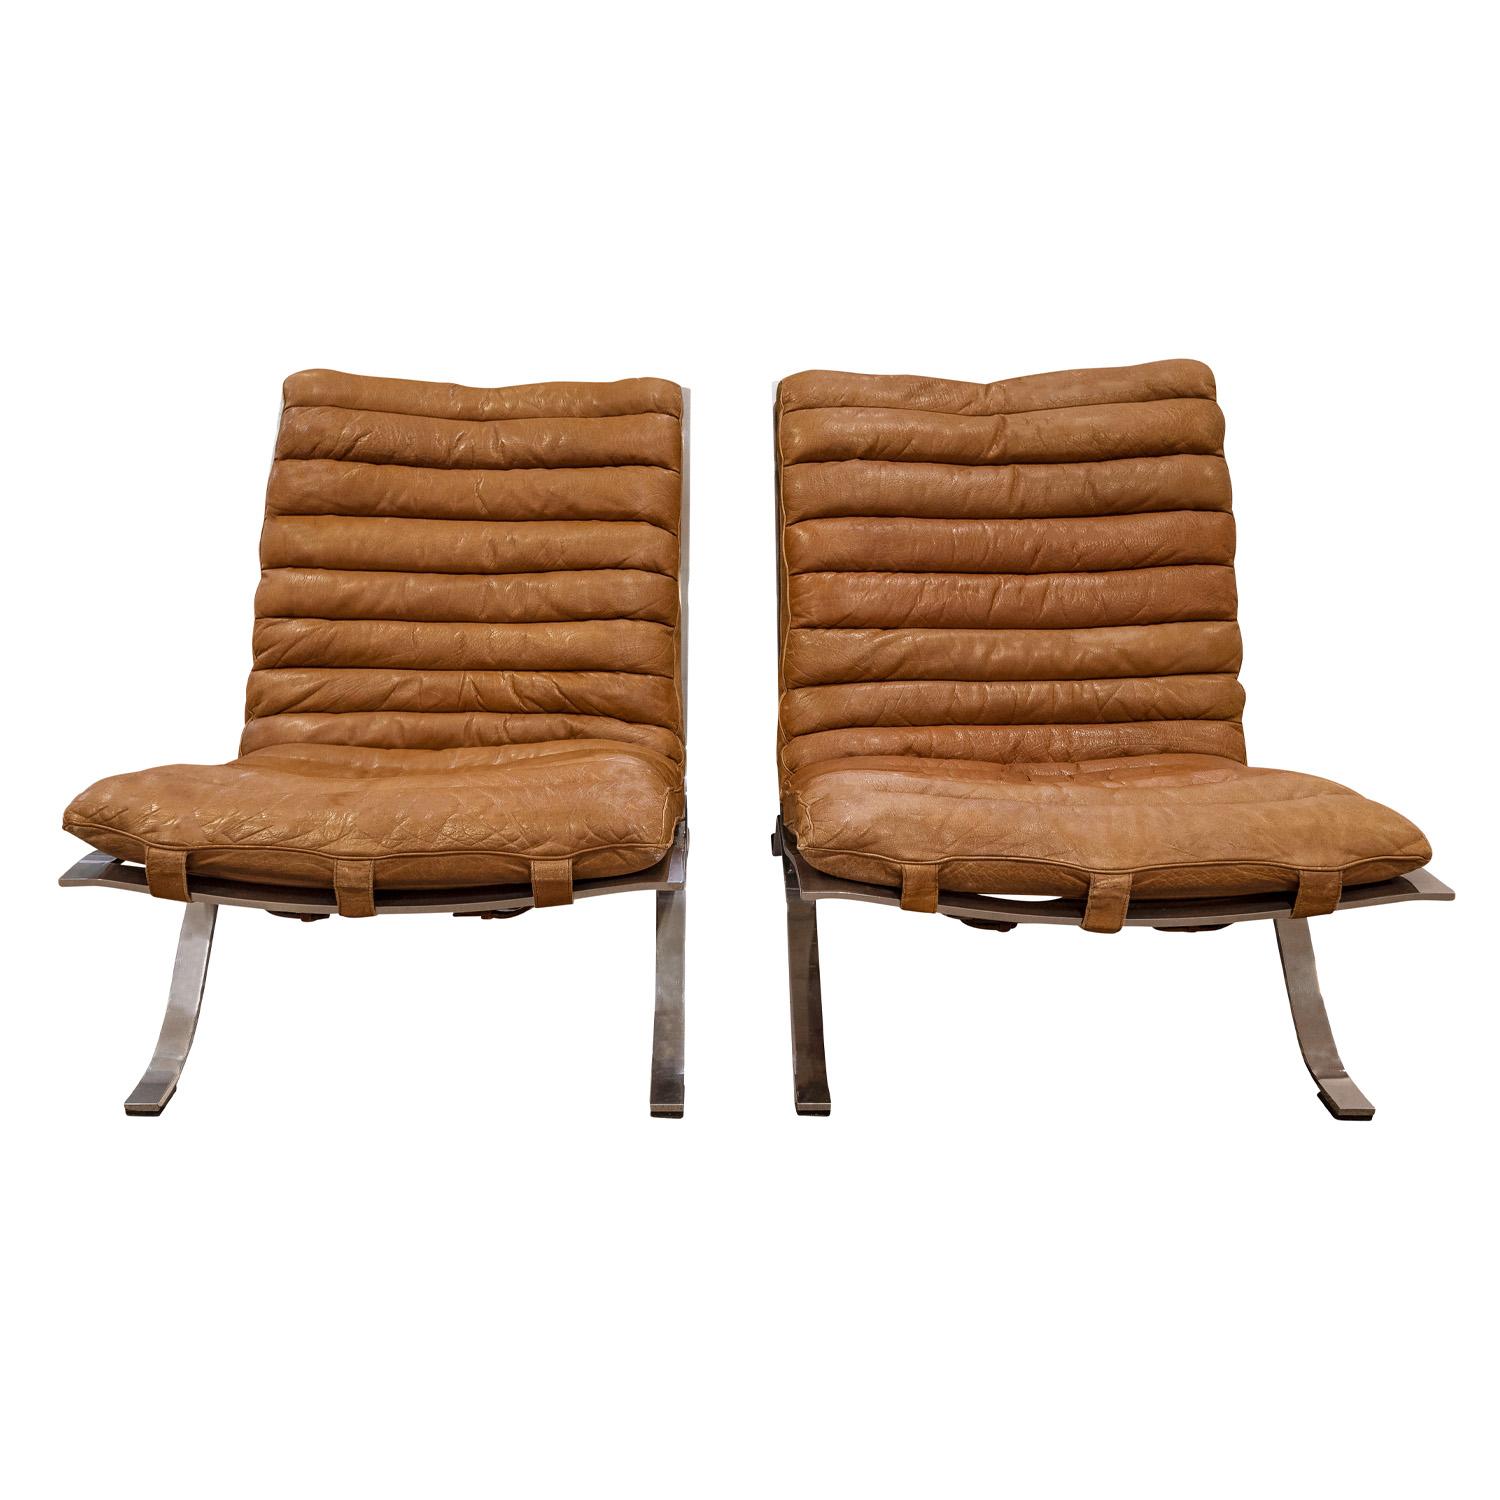 Mid-Century Modern Arne Norell Pair of Lounge Chairs with Original Leather Slings 1960s (Signed) For Sale